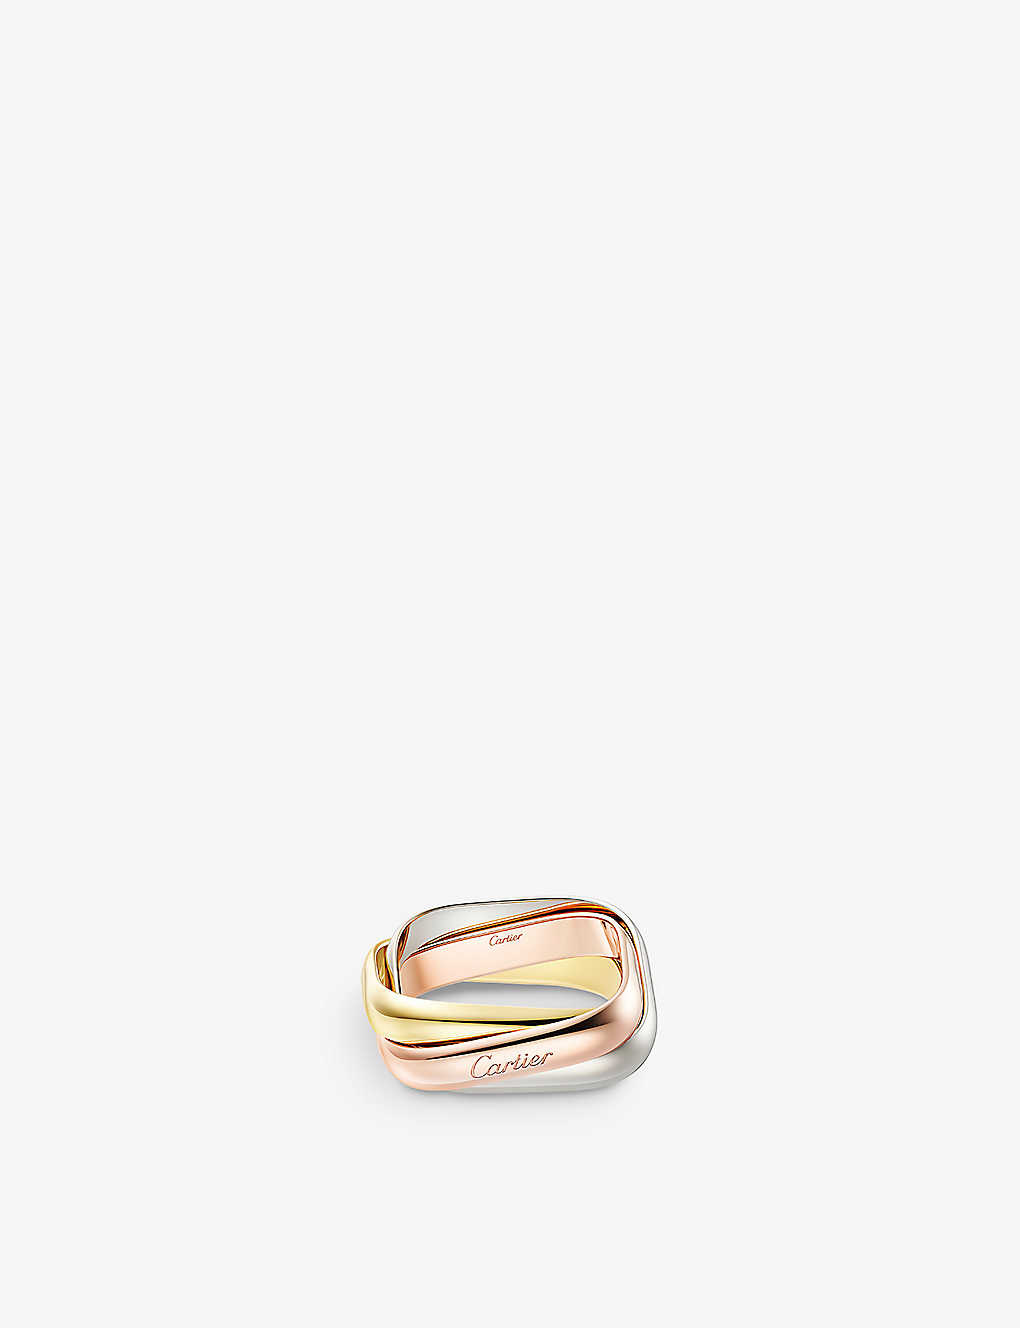 Cartier Women's Gold Trinity 18ct White, Rose And Yellow-gold Ring